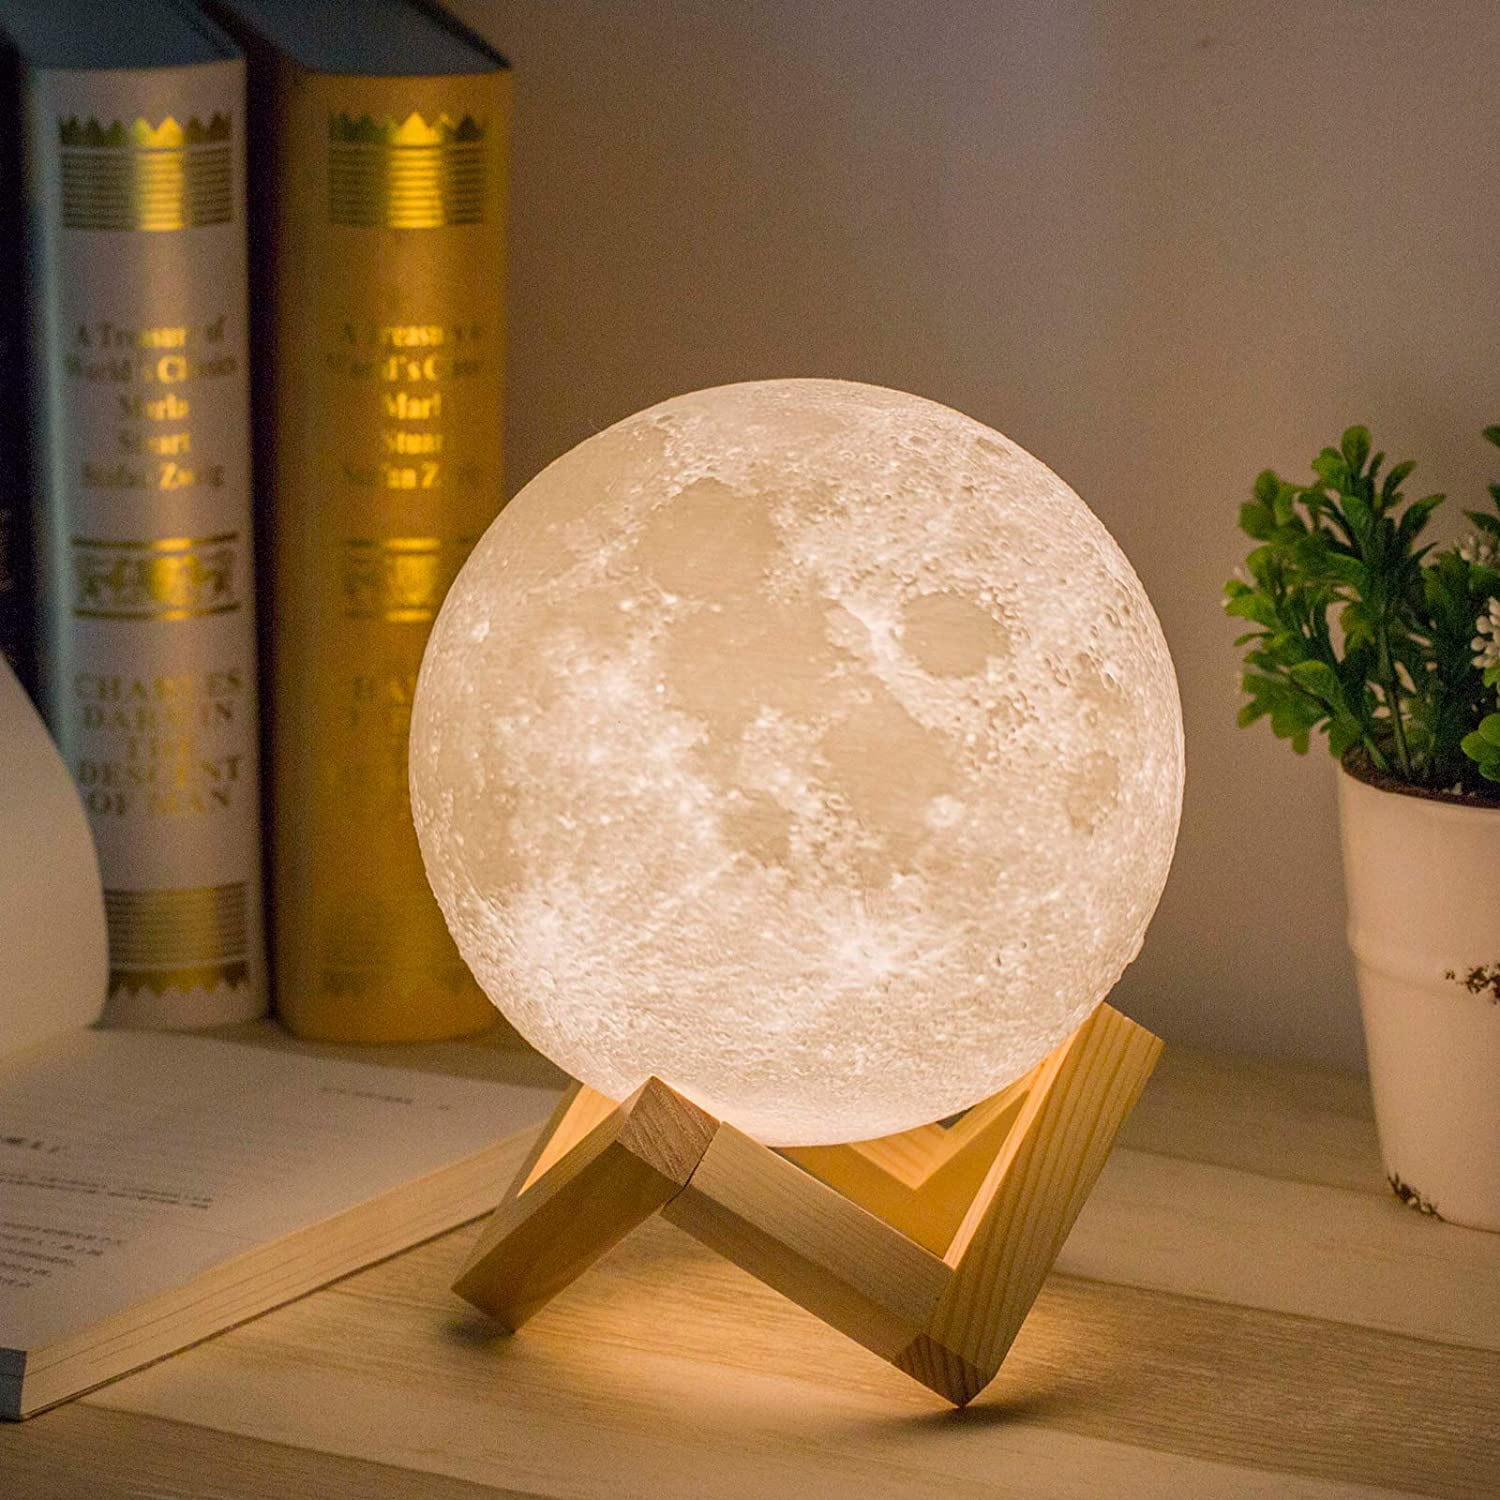 Moon Night Lamp Light LED Warm/Cool White Dim Touch control USB Recharge Gift! 